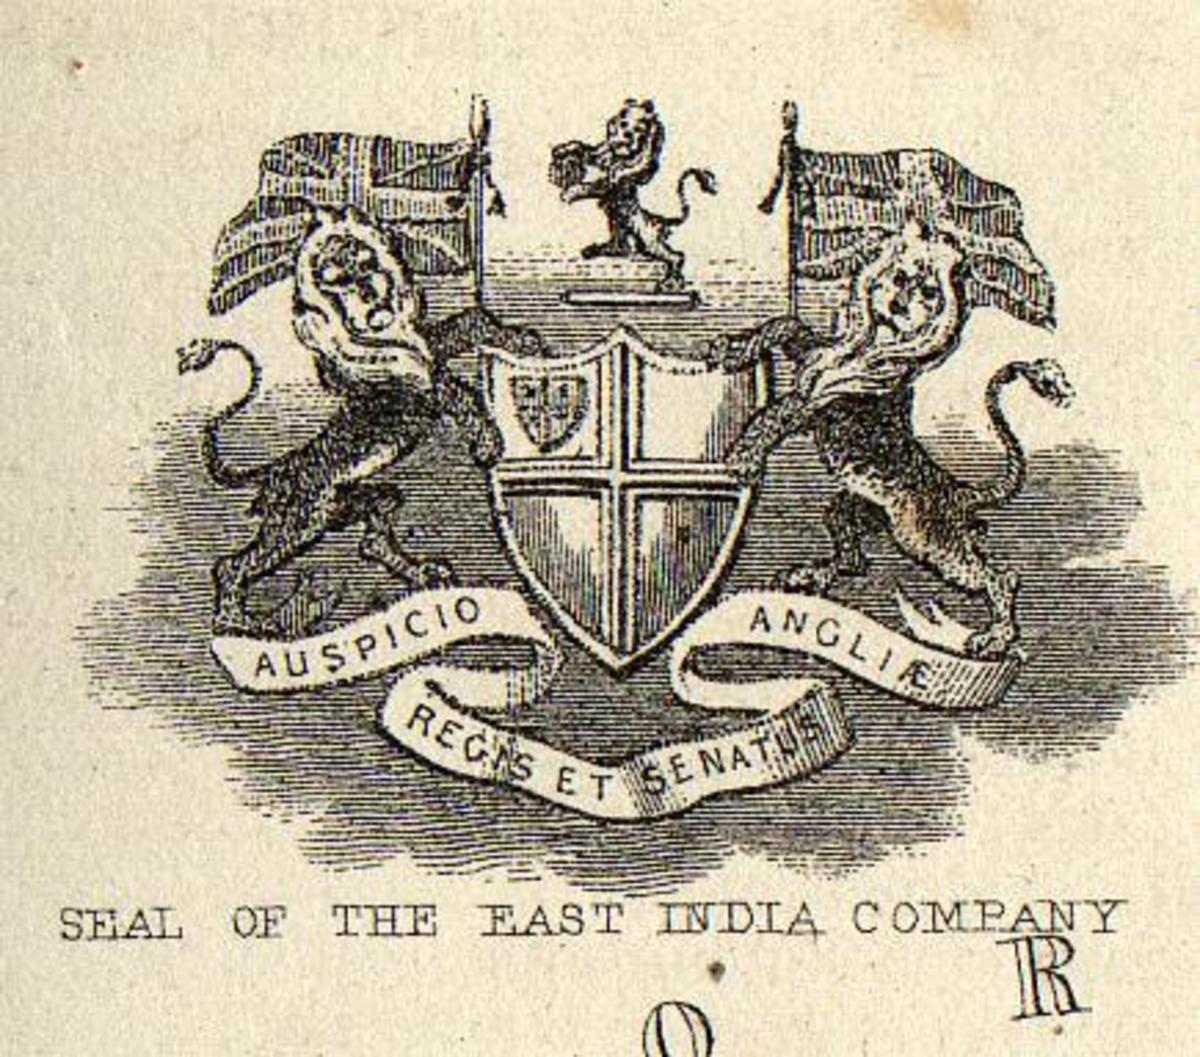 Coat of Arms of the East India Company